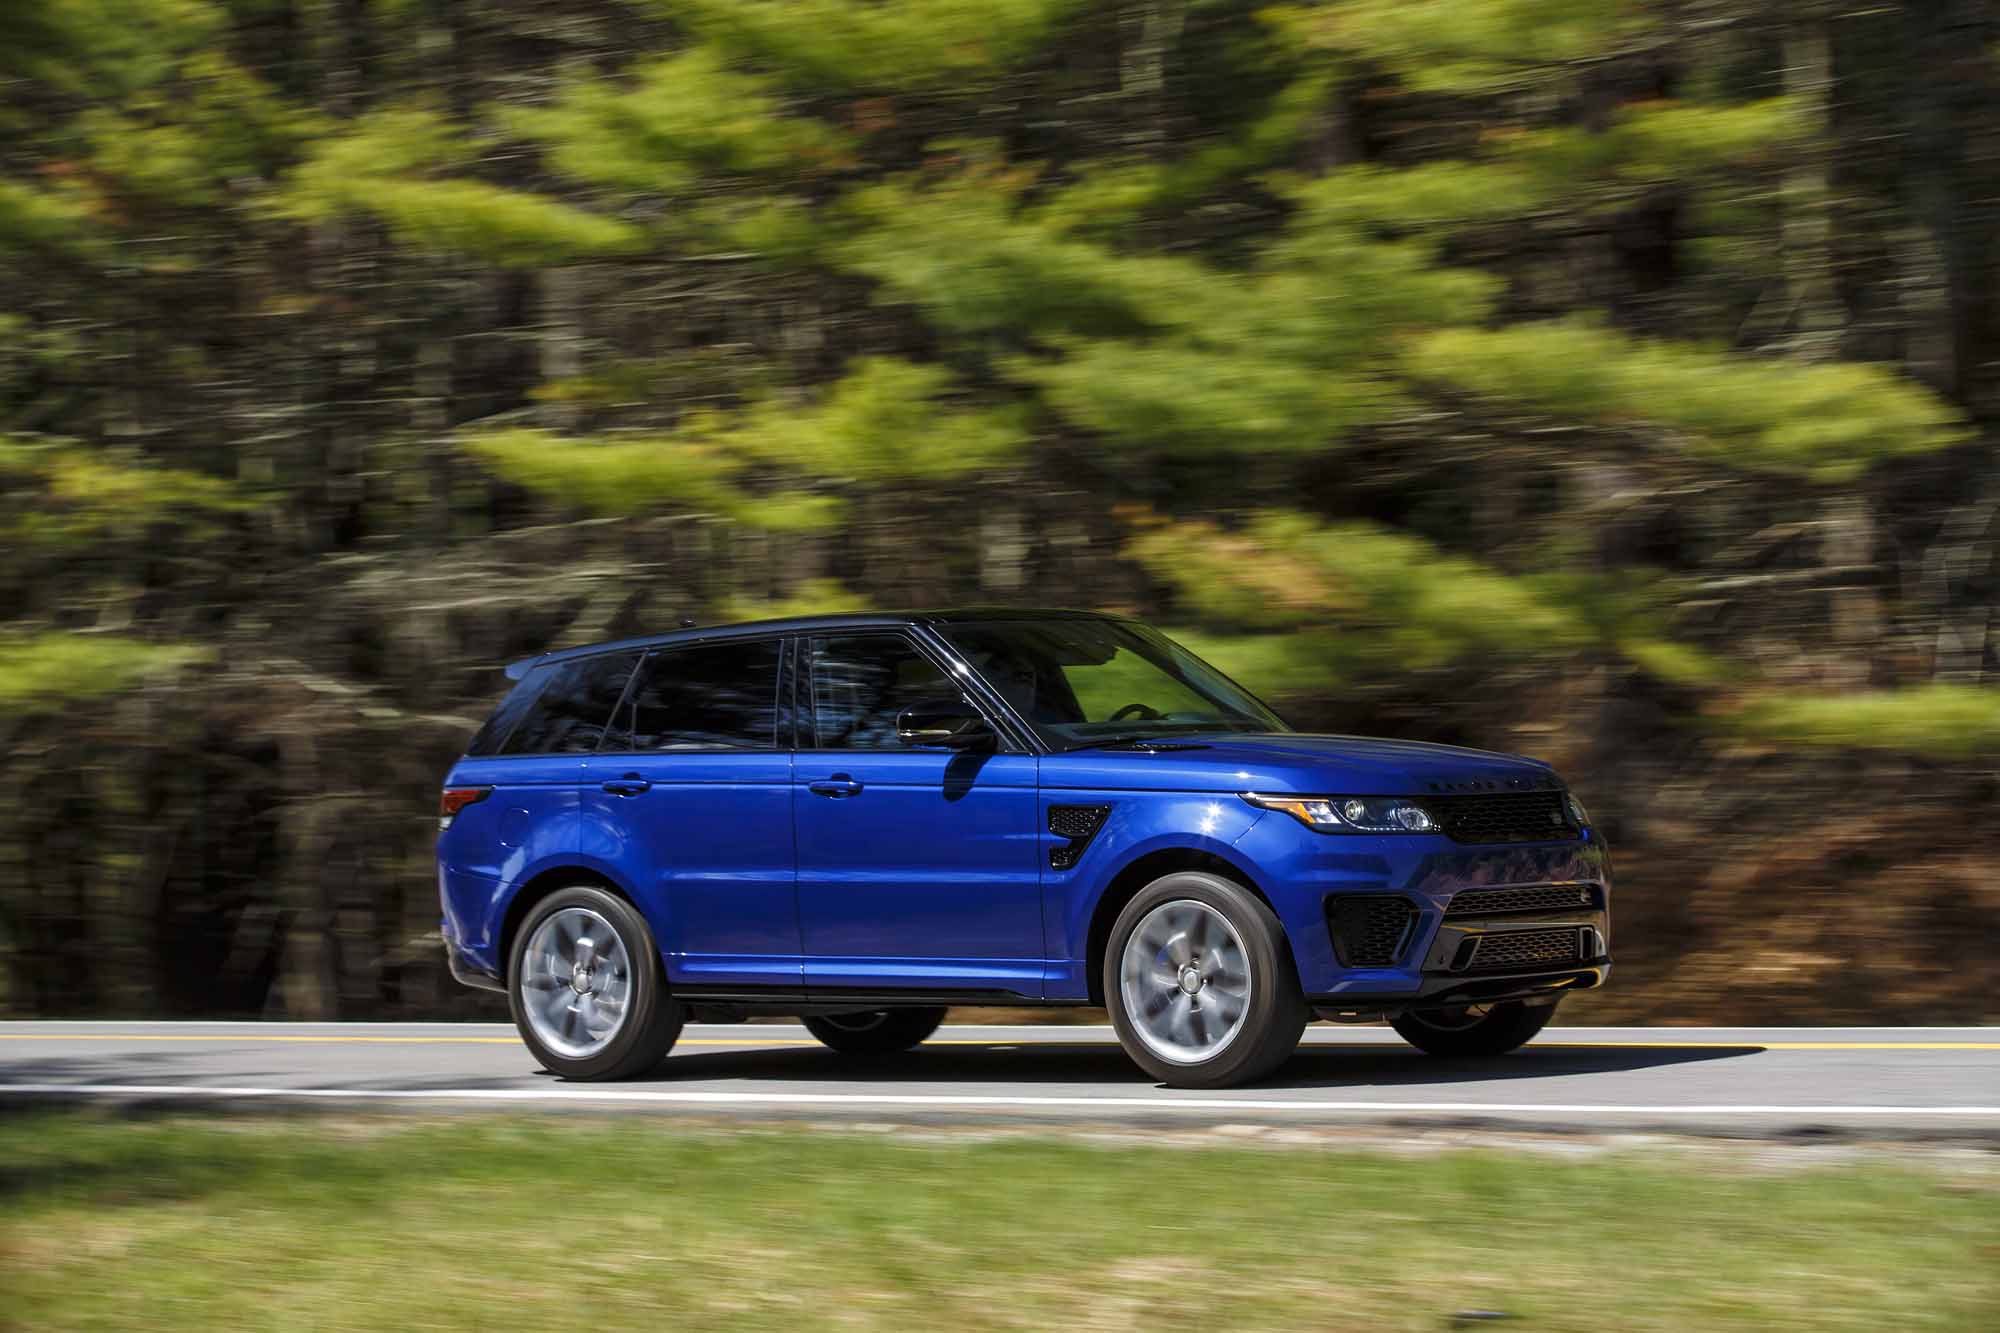 Range Rover Sport Supercharged HD Image 2016 Cars